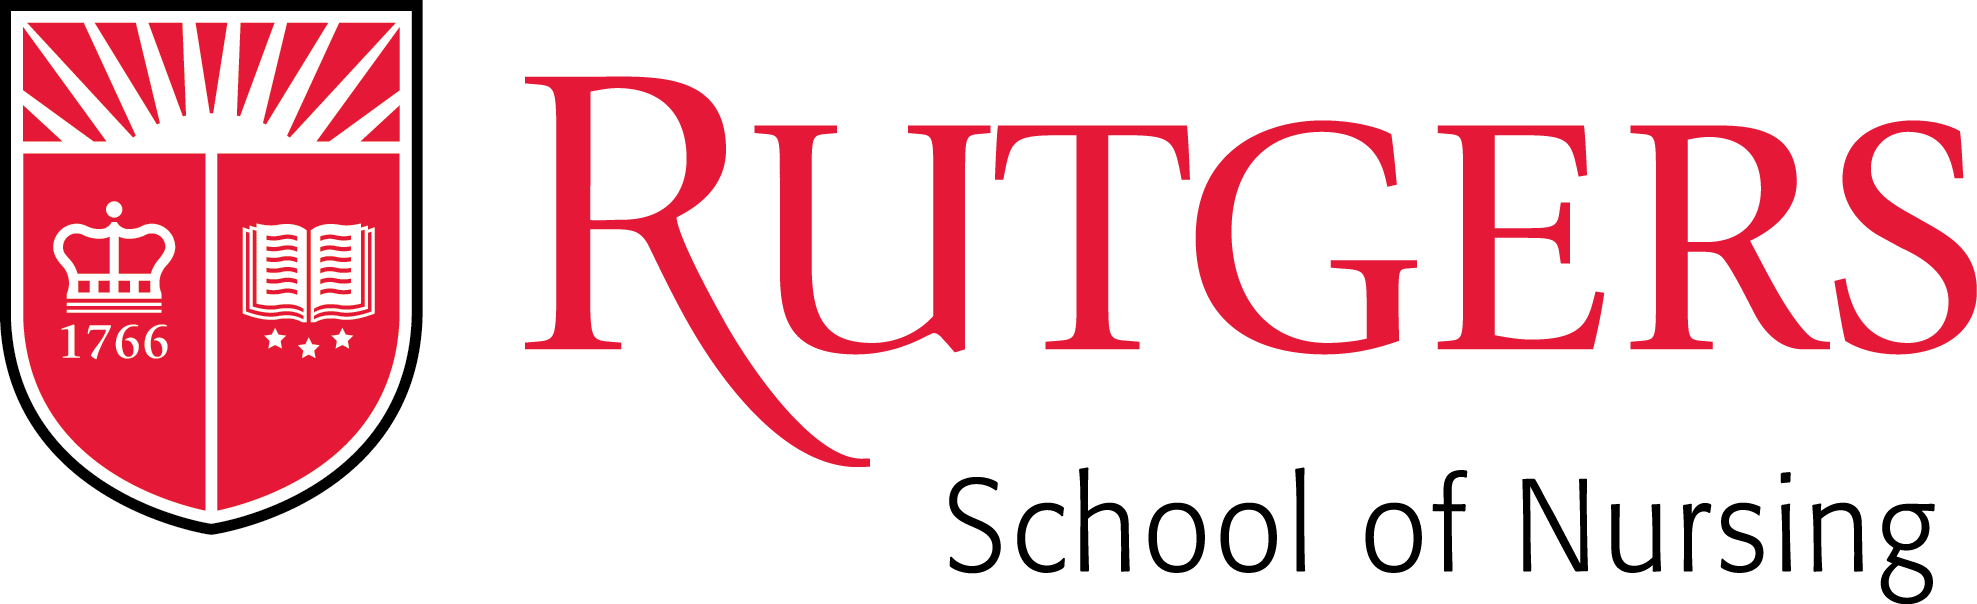 Rutgers Logo - Faculty and Staff Central | Rutgers School of Nursing